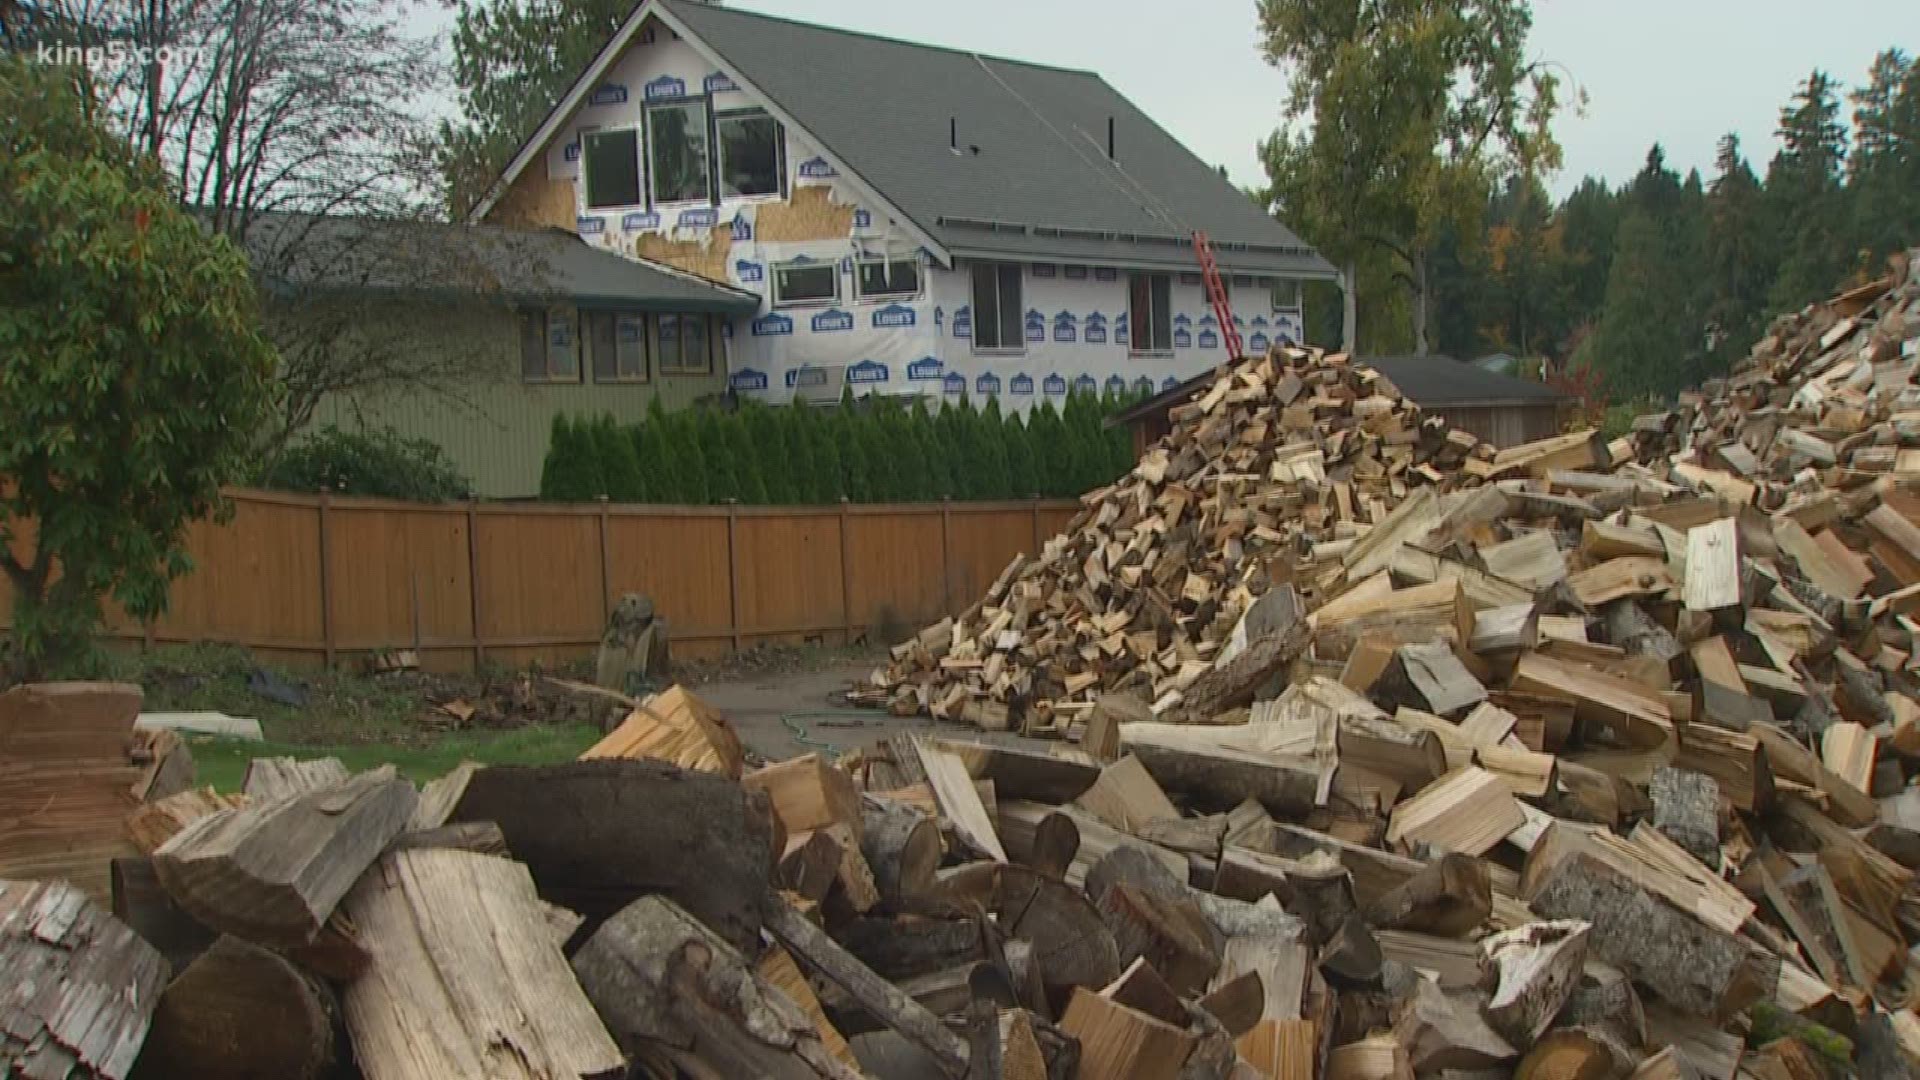 Shane McDaniel is being fined by the city of Lake Stevens for keeping wood on his property that is used for charity.